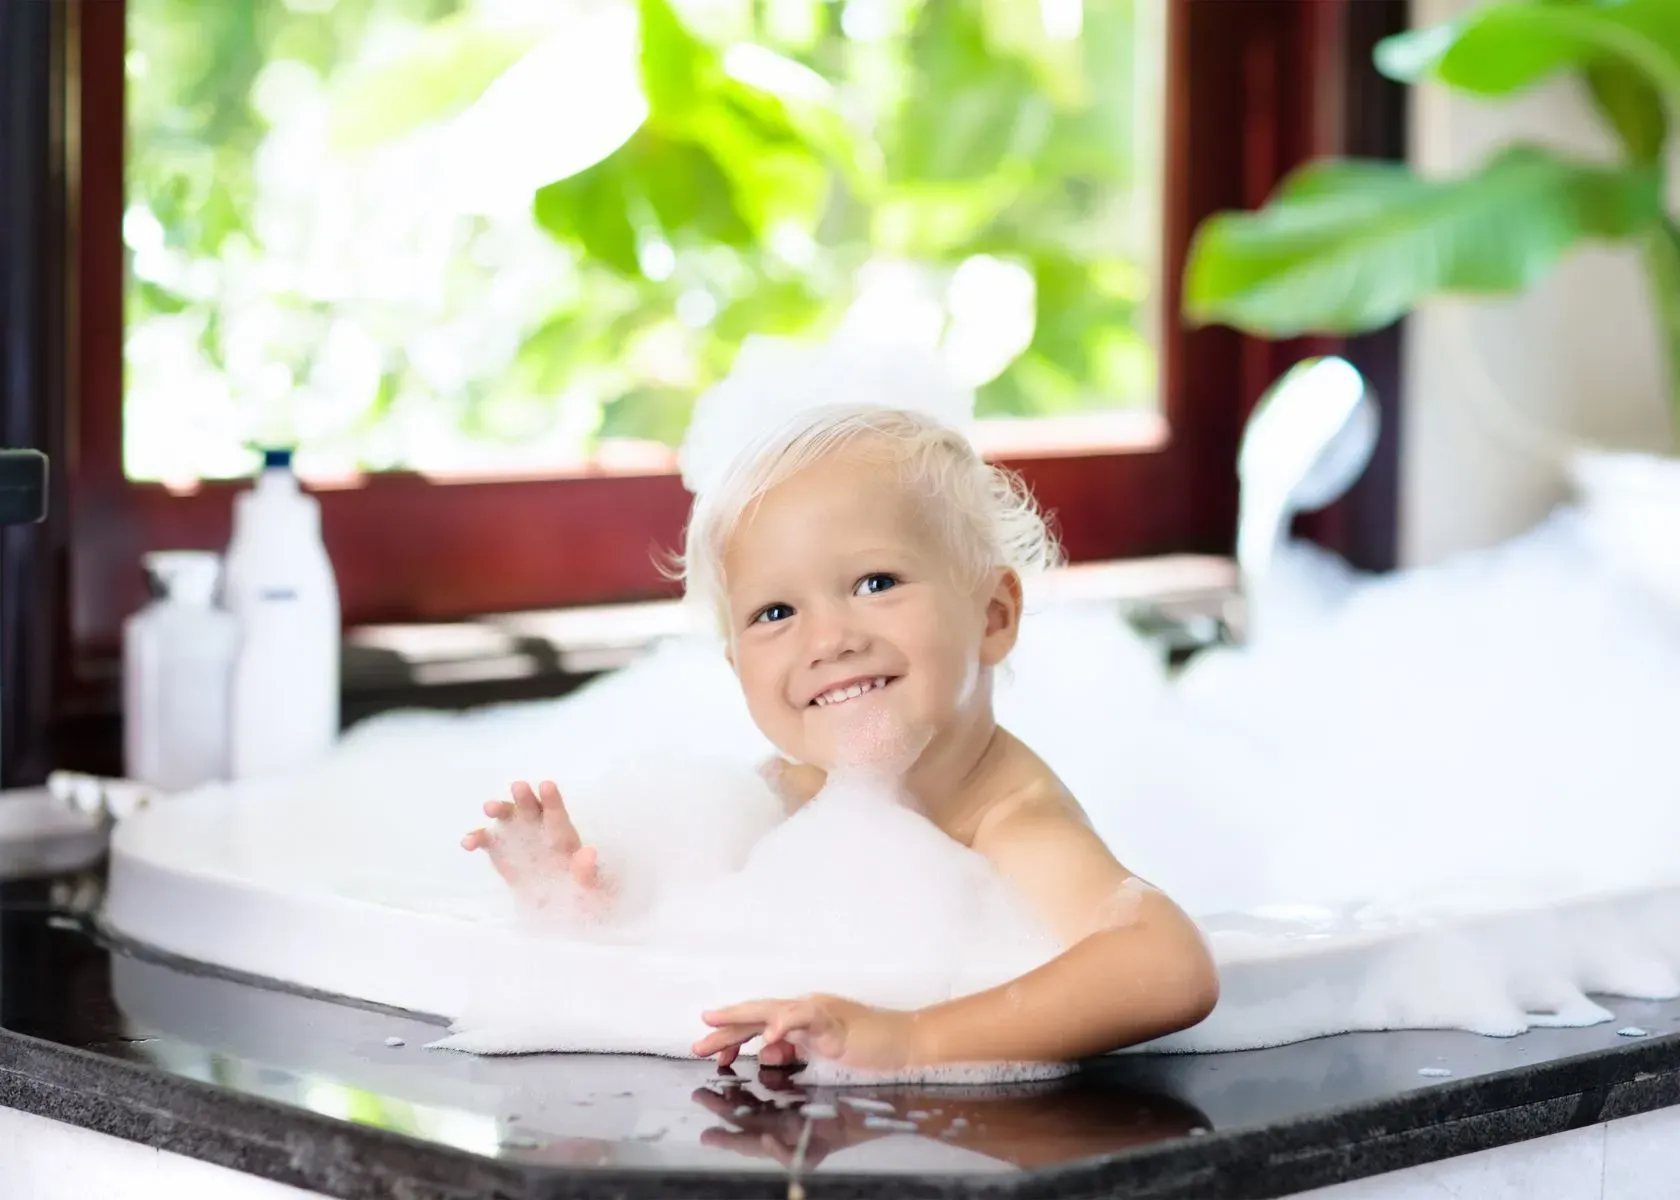 Frequently Asked Questions About Kids Shampoo